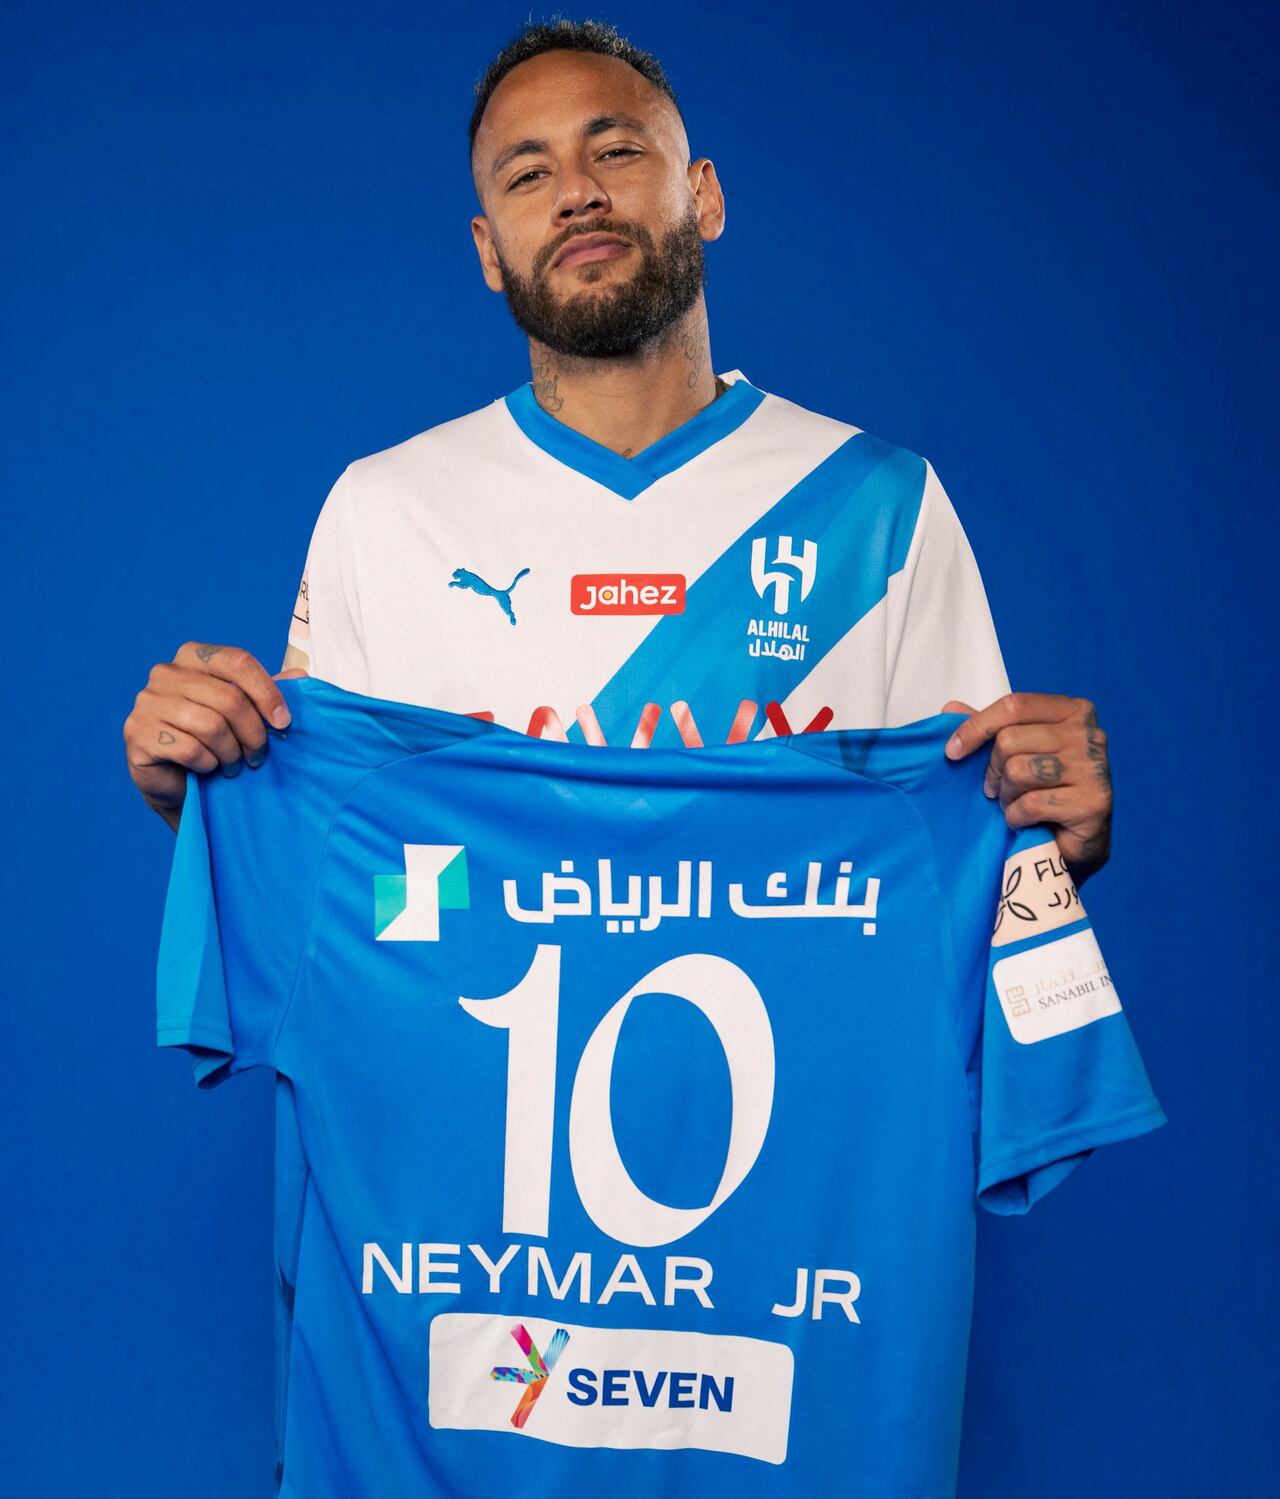 Soccer Football - Neymar signs for Al Hilal - Paris, France - August 15, 2023 Al Hilal's new signing Neymar poses in their shirt after signing Al Hilal Sports Club/Handout via REUTERS??ATTENTION EDITORS - THIS IMAGE HAS BEEN SUPPLIED BY A THIRD PARTY. NO RESALES. NO ARCHIVES